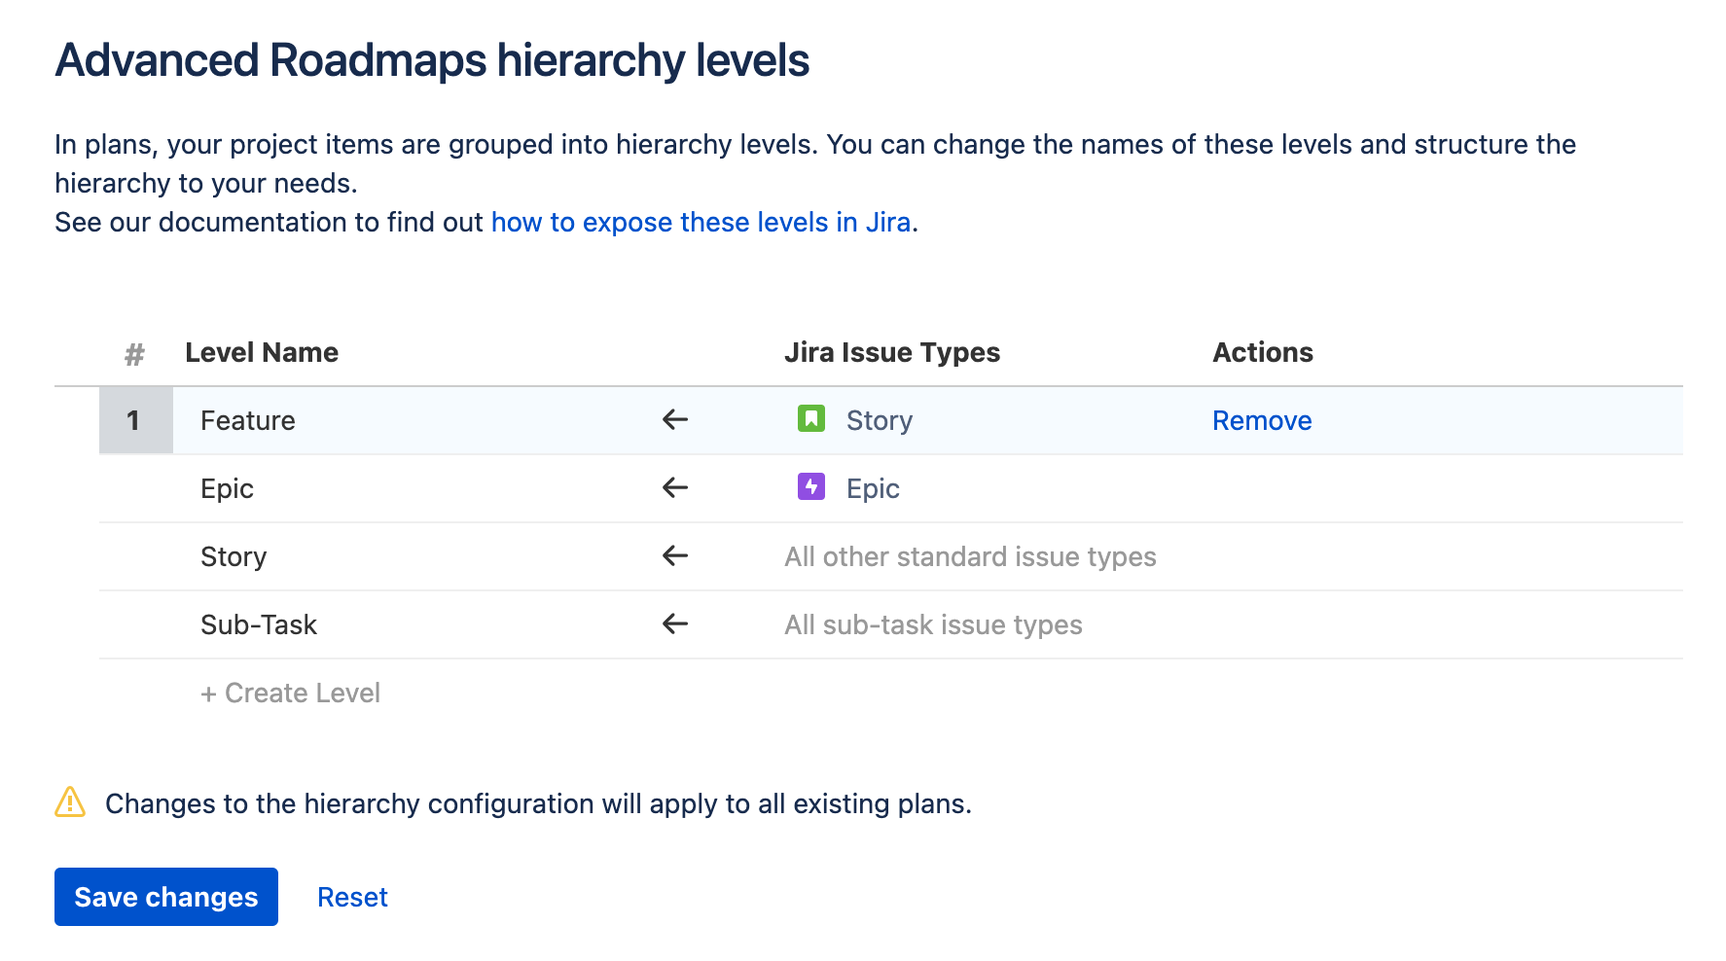 Updating the issue hierarchy on the Advanced Roadmaps hierarchy levels screen